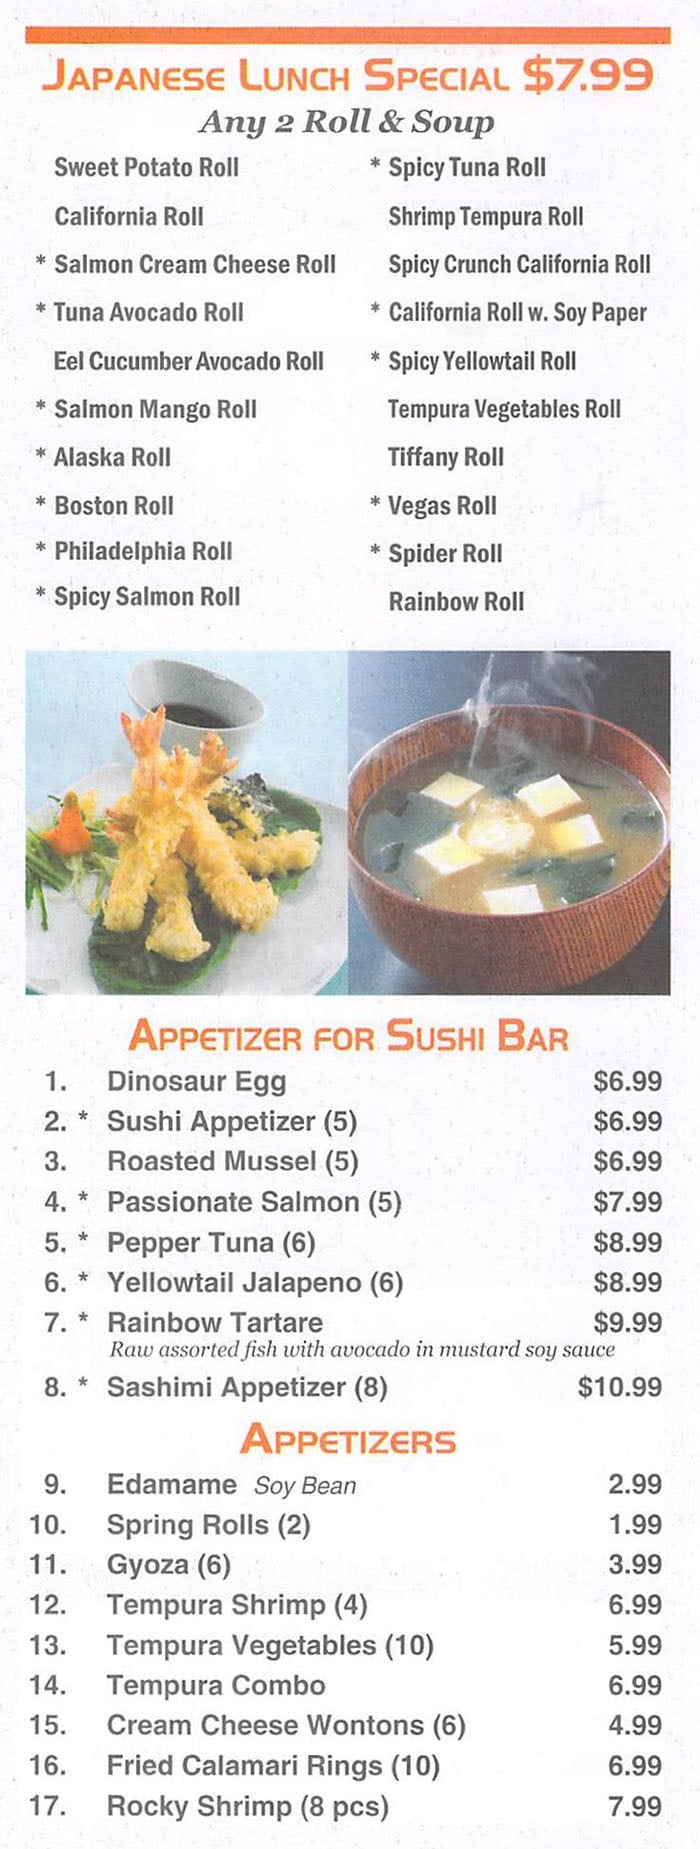 Red 8 Asian Bistro & Sushi Bar menu - Japanese lunch special, appetizers